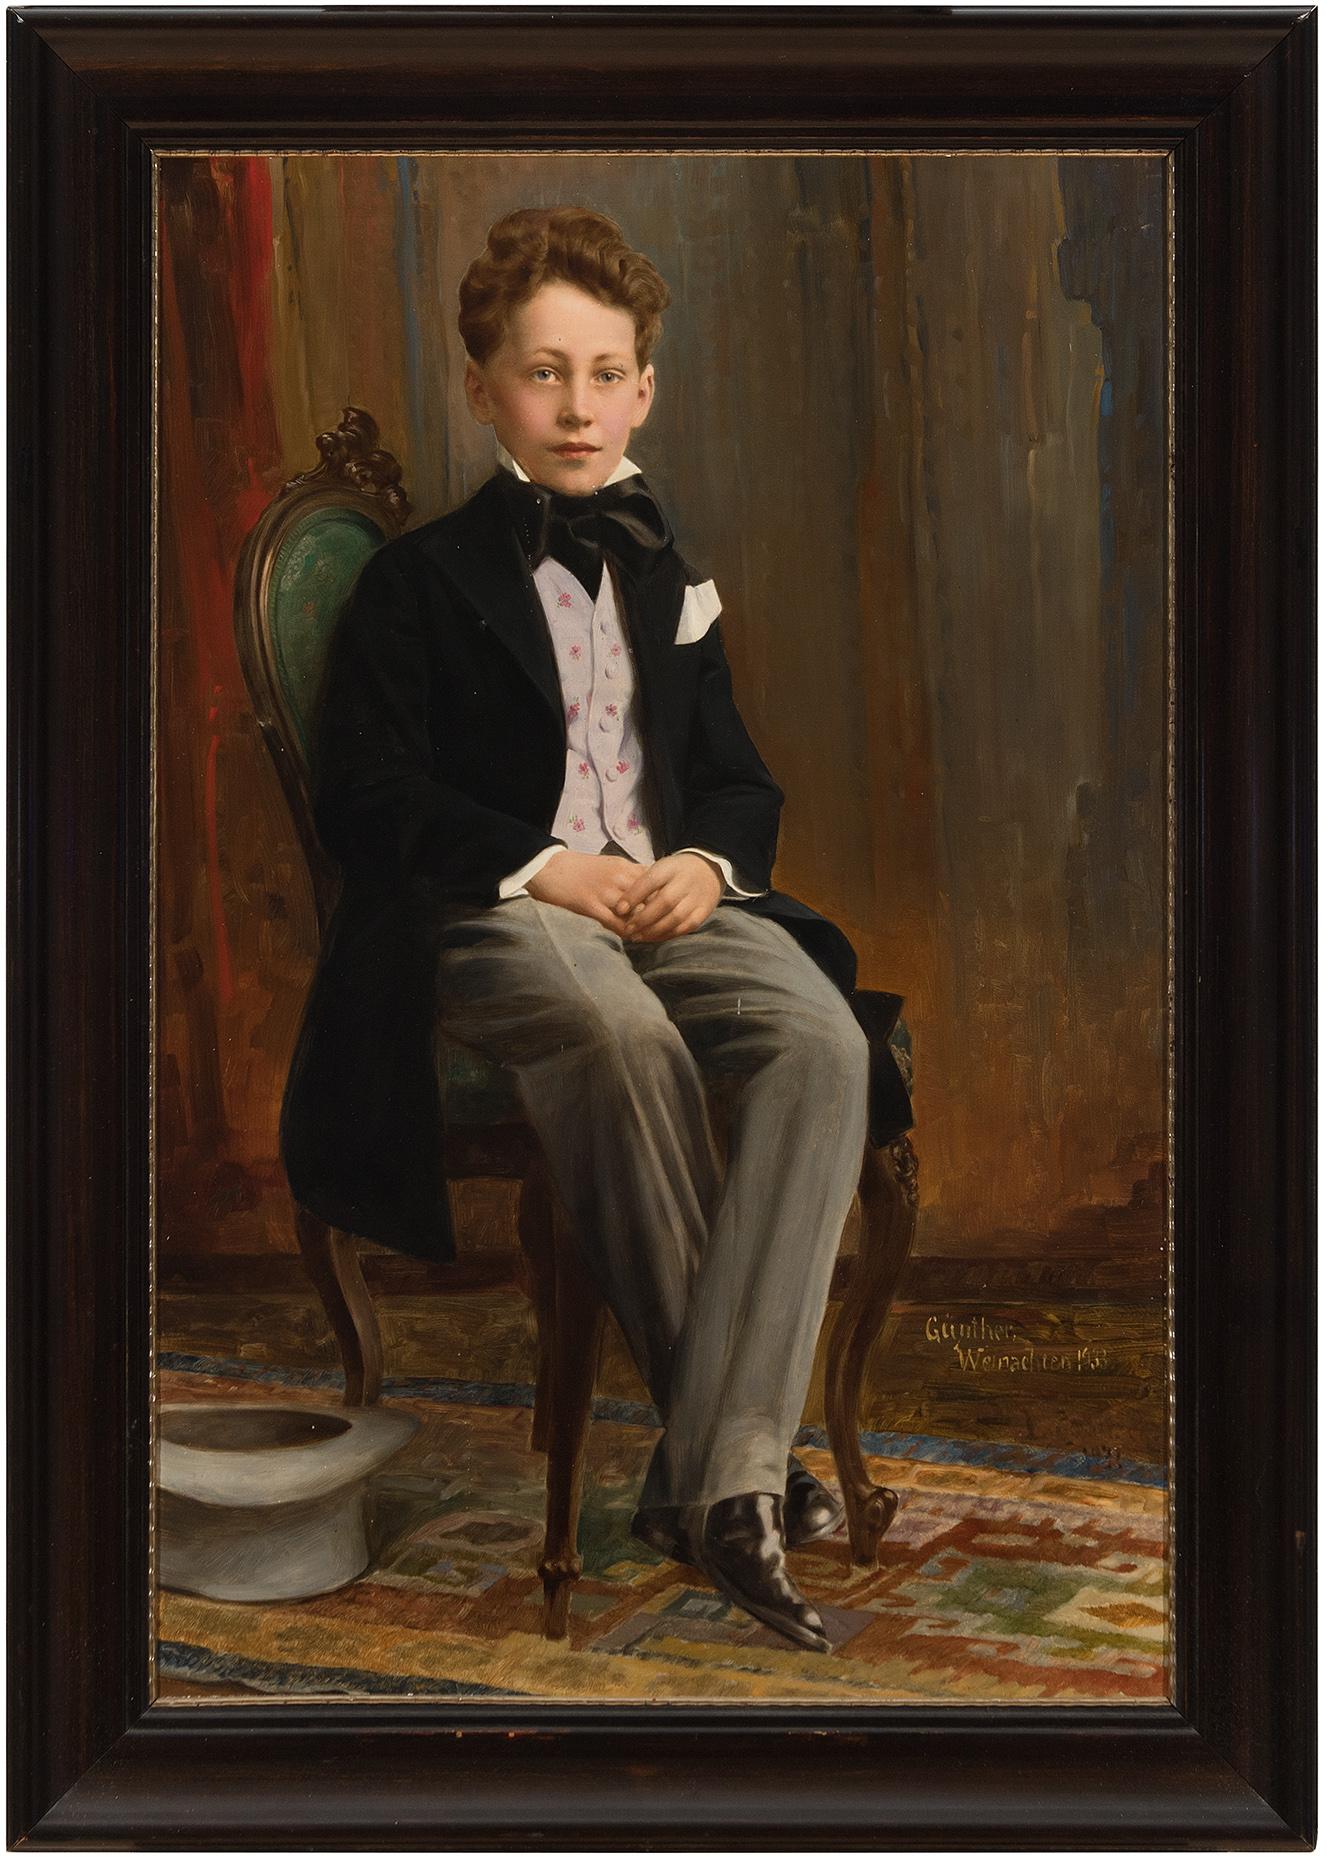 Unknown Portrait Painting - Early 20th-Century German School Portrait Of A Boy, Oil Painting